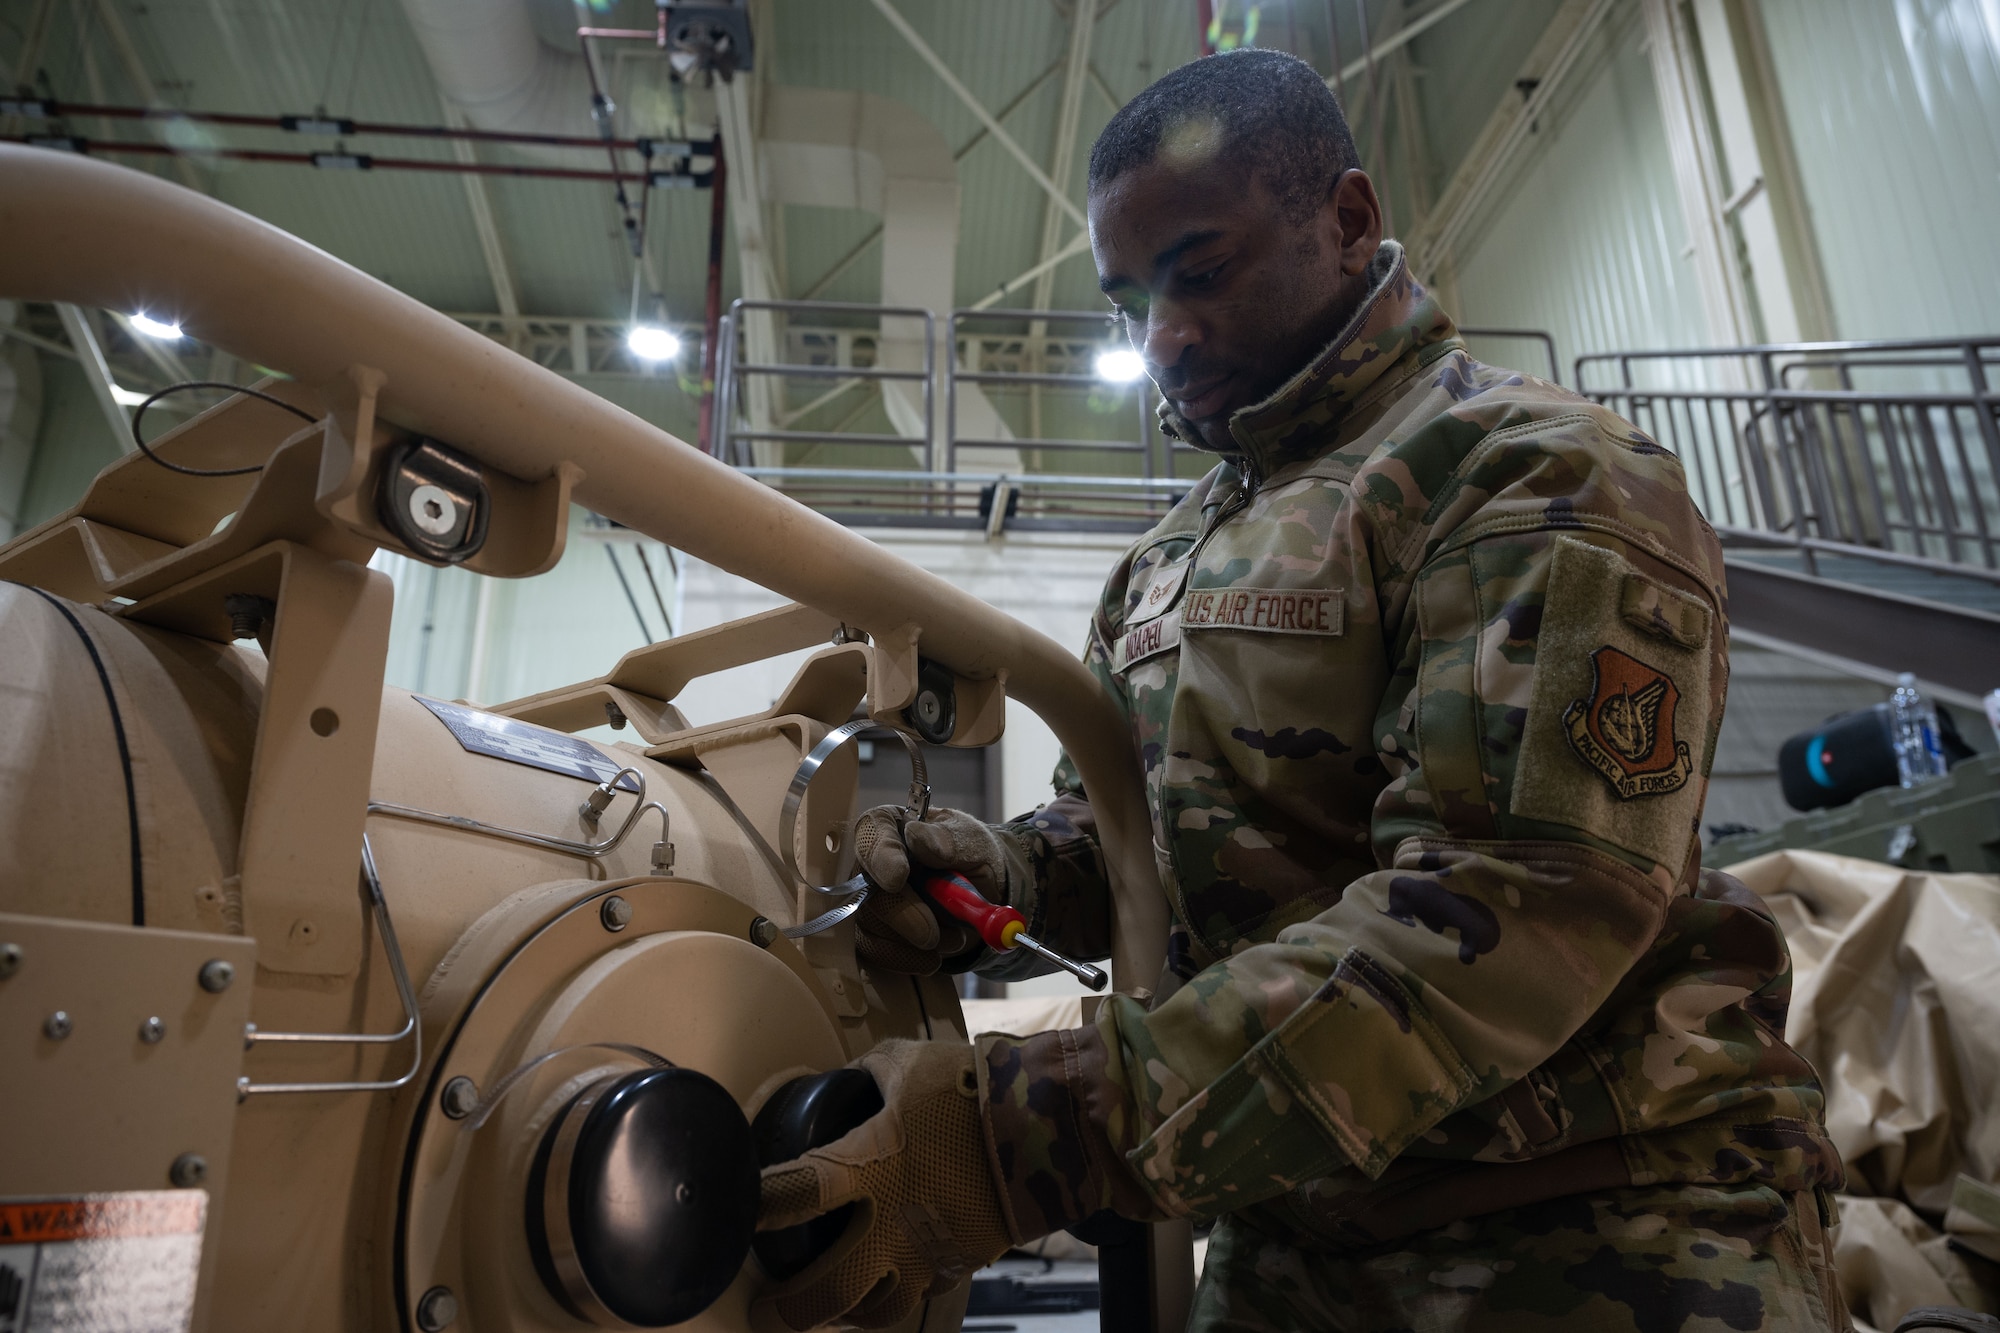 Staff Sgt. Eric Ndapeu, 8th Healthcare Operations Squadron (HCOS) NCO in charge of contingency materiel, sets up the fan filter assembly (FFA) at Kunsan Air Base, Republic of Korea, Jan. 20, 2023. The 8th HCOS installed two FFAs for the tent kit 2 chemical protection system, one for the toxic-free area and the multi-functional entrance, aiding in equalizing the air pressure in each room. (U.S. Air Force photo by Senior Airman Akeem K. Campbell)